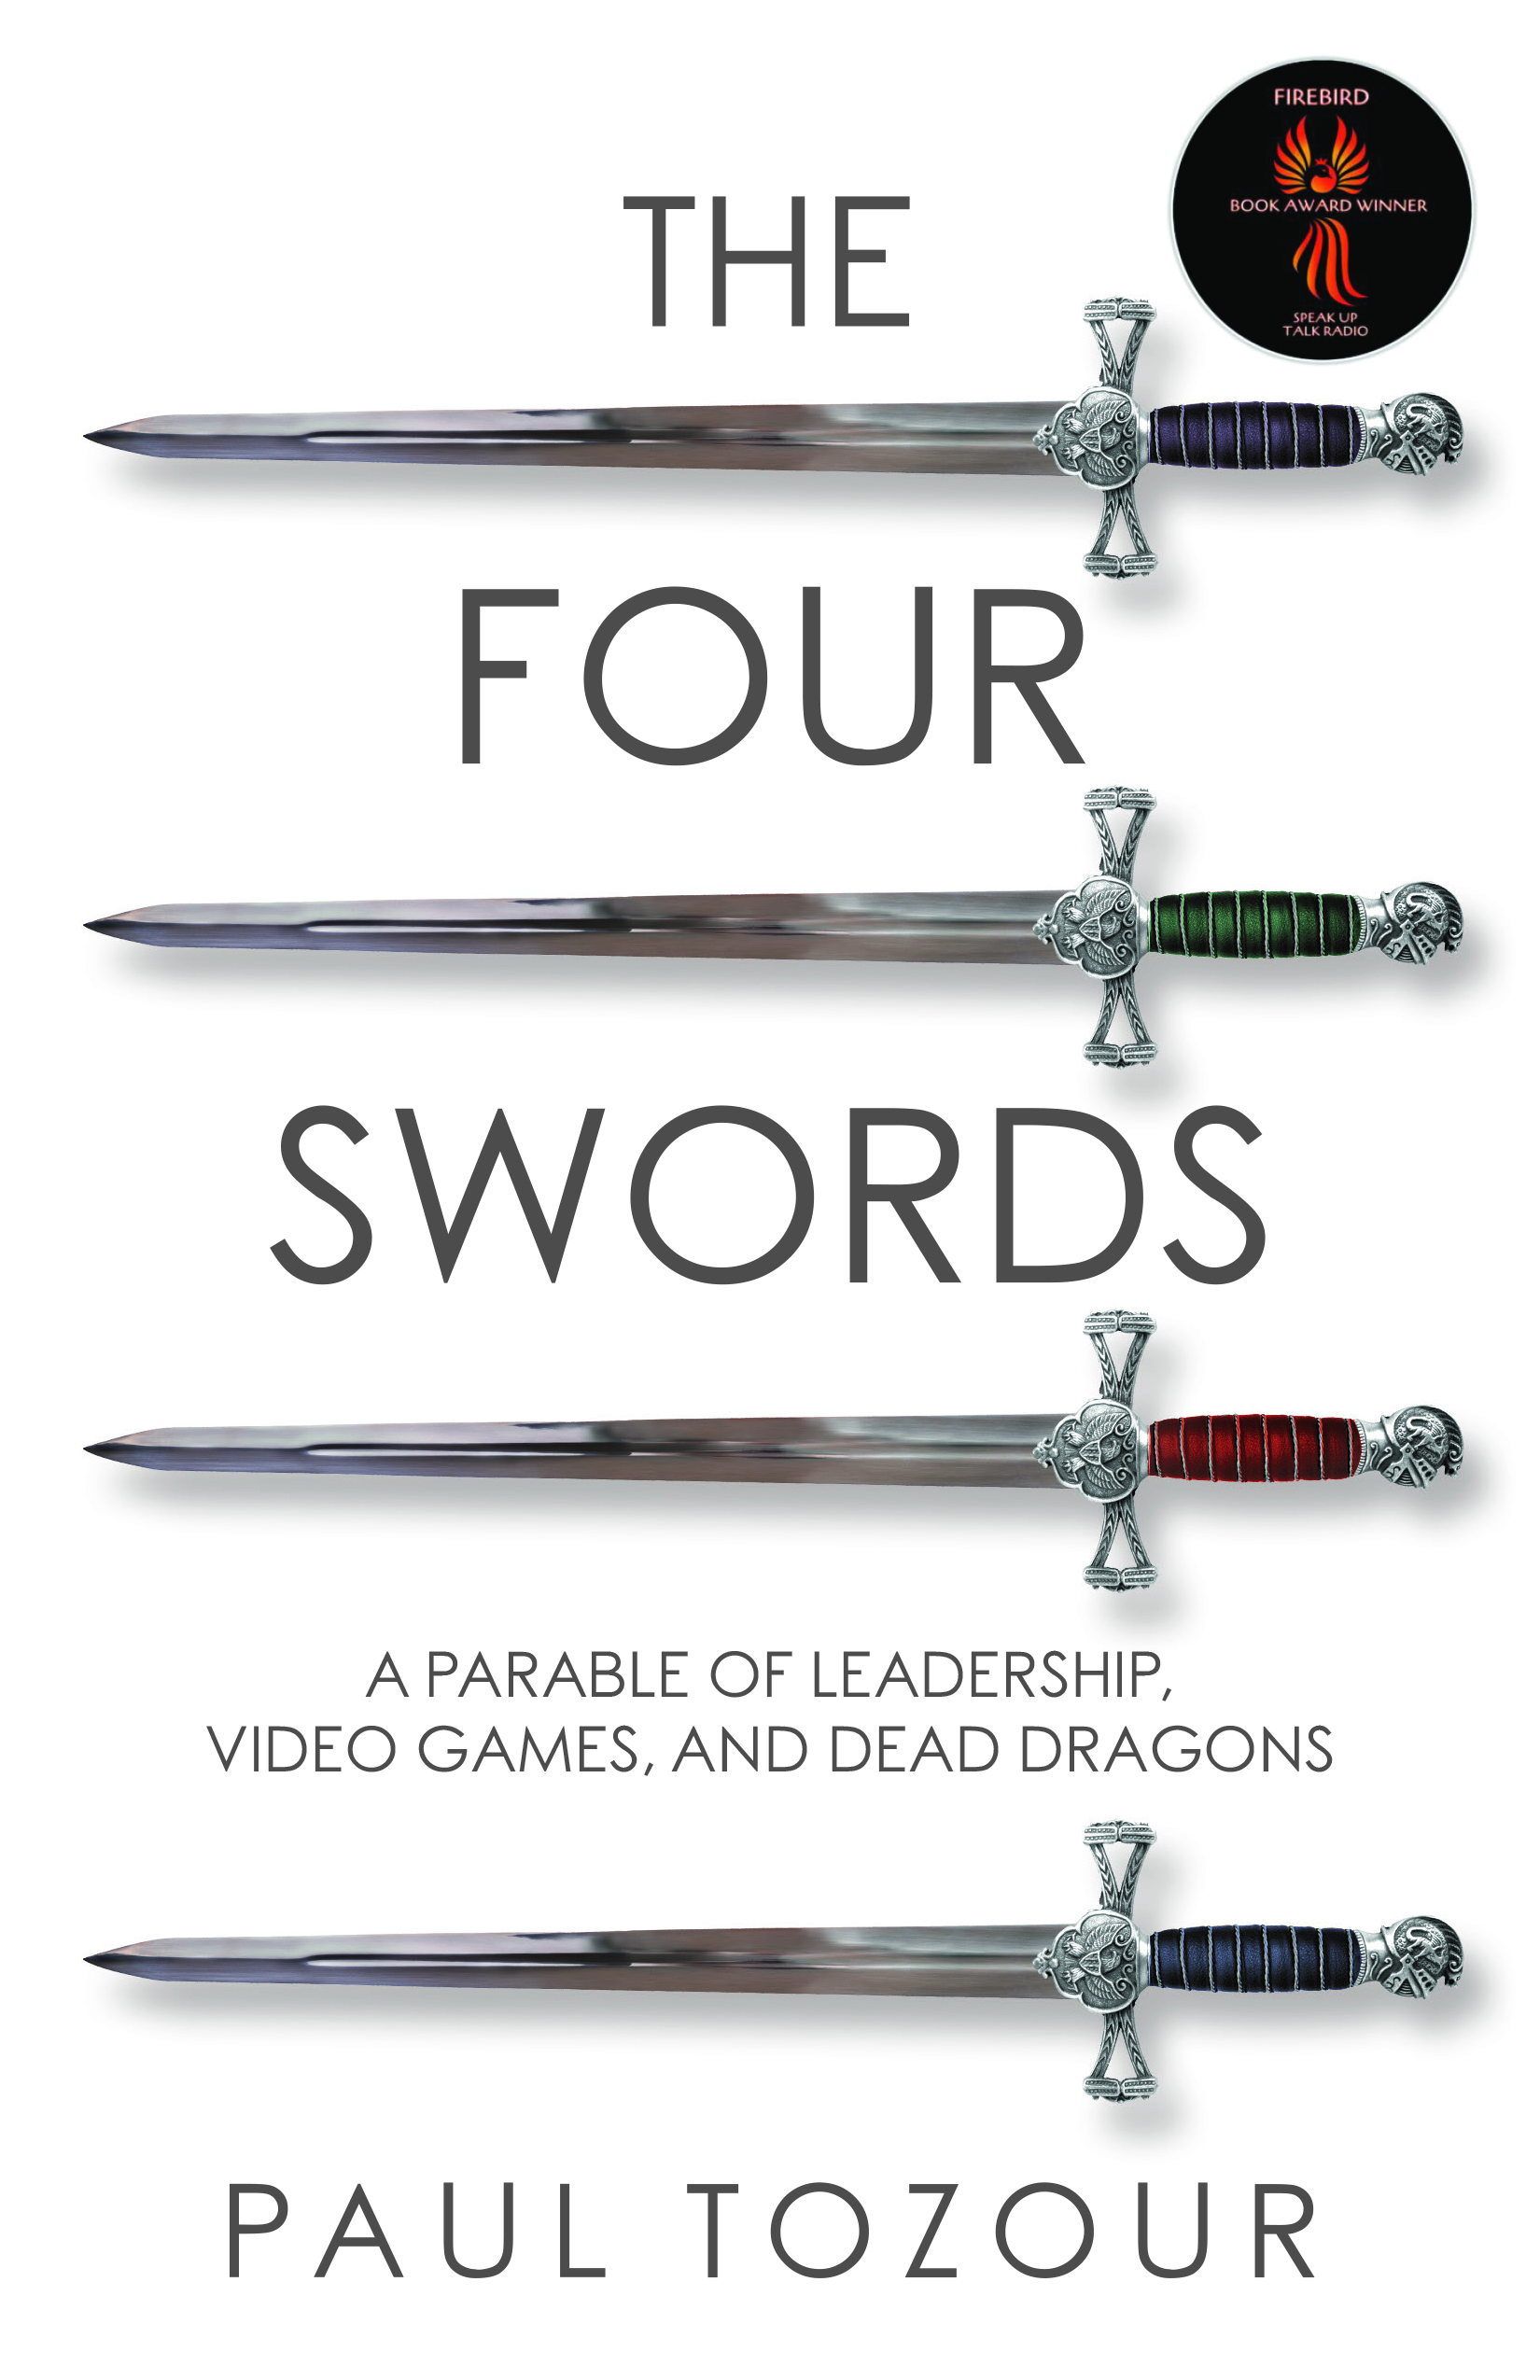 The Four Swords: A Parable of Leadership, Video Games, and Dead Dragons by Paul Tozour